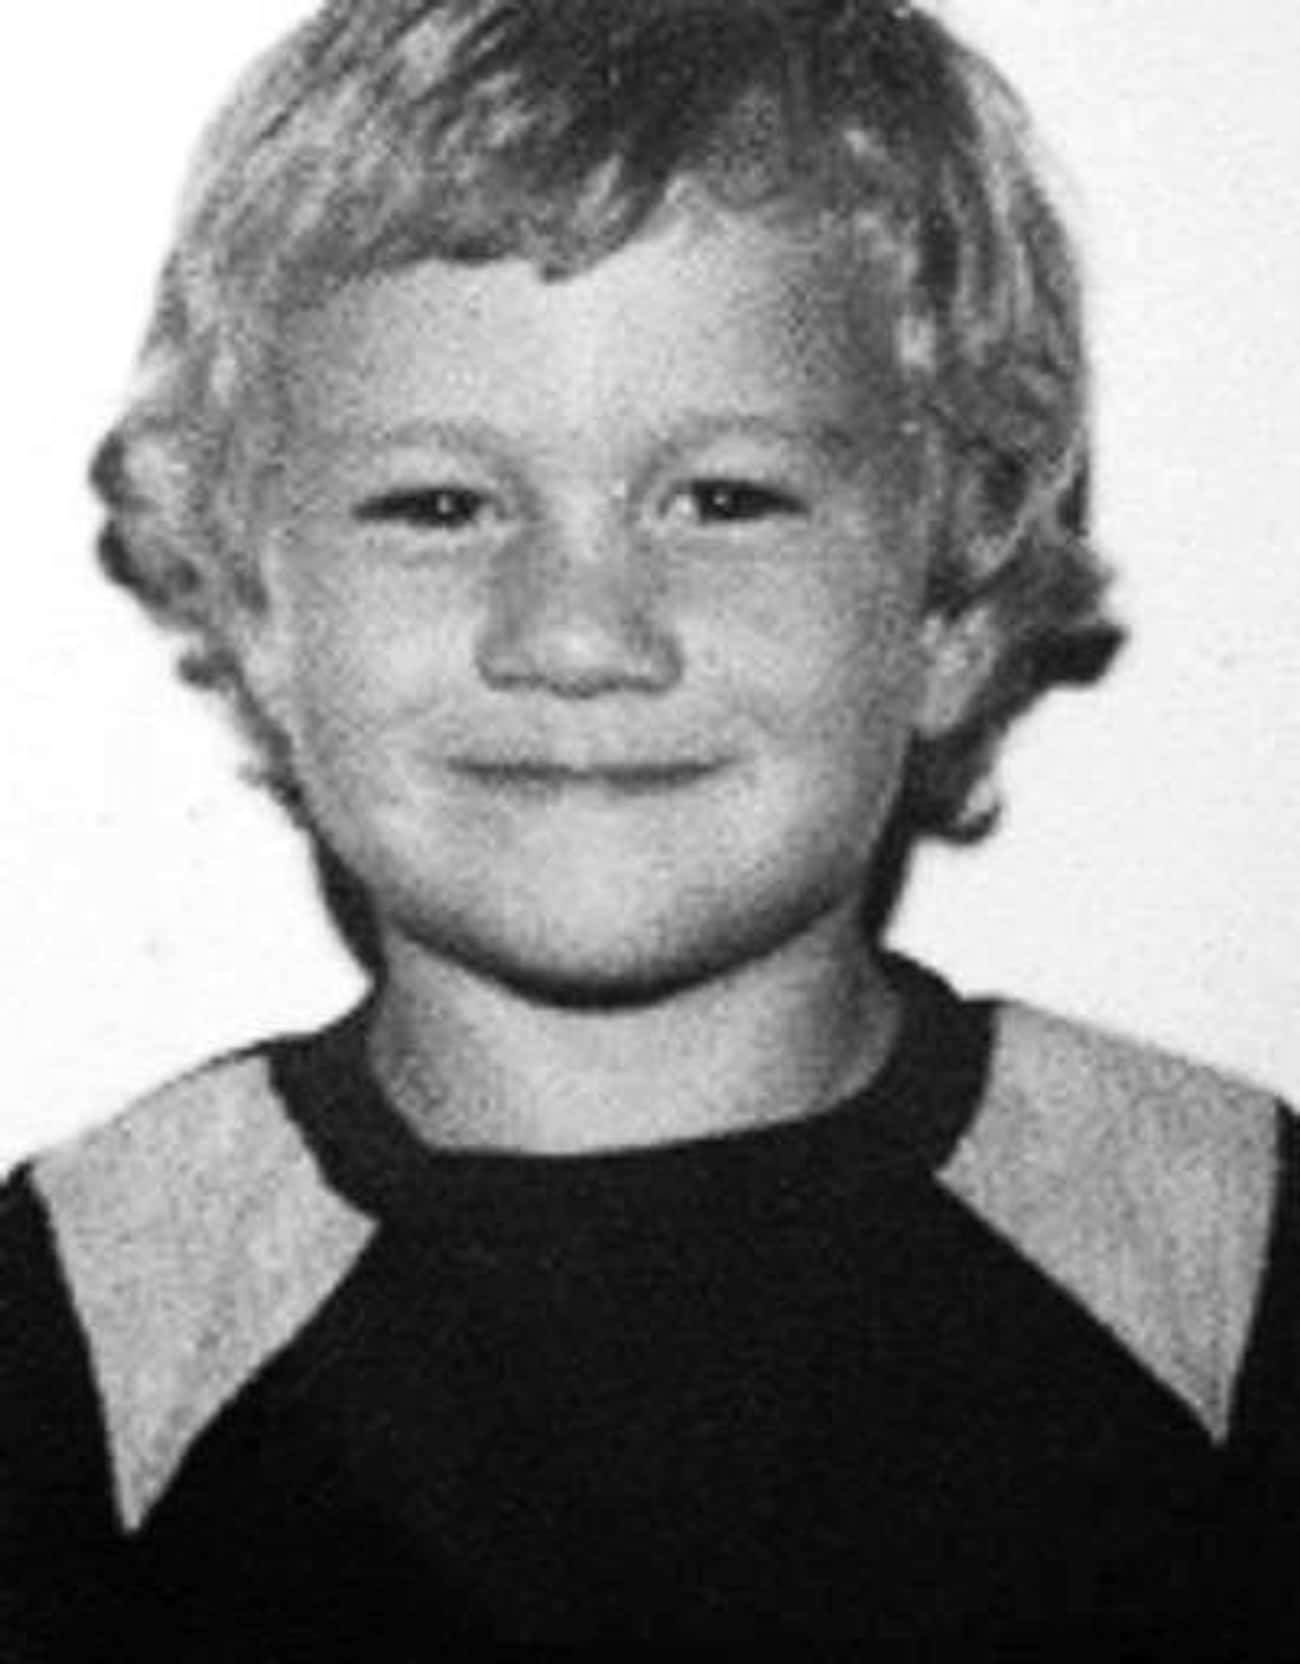 Young Heath Ledger in Black and Gray Sweater as a Kid